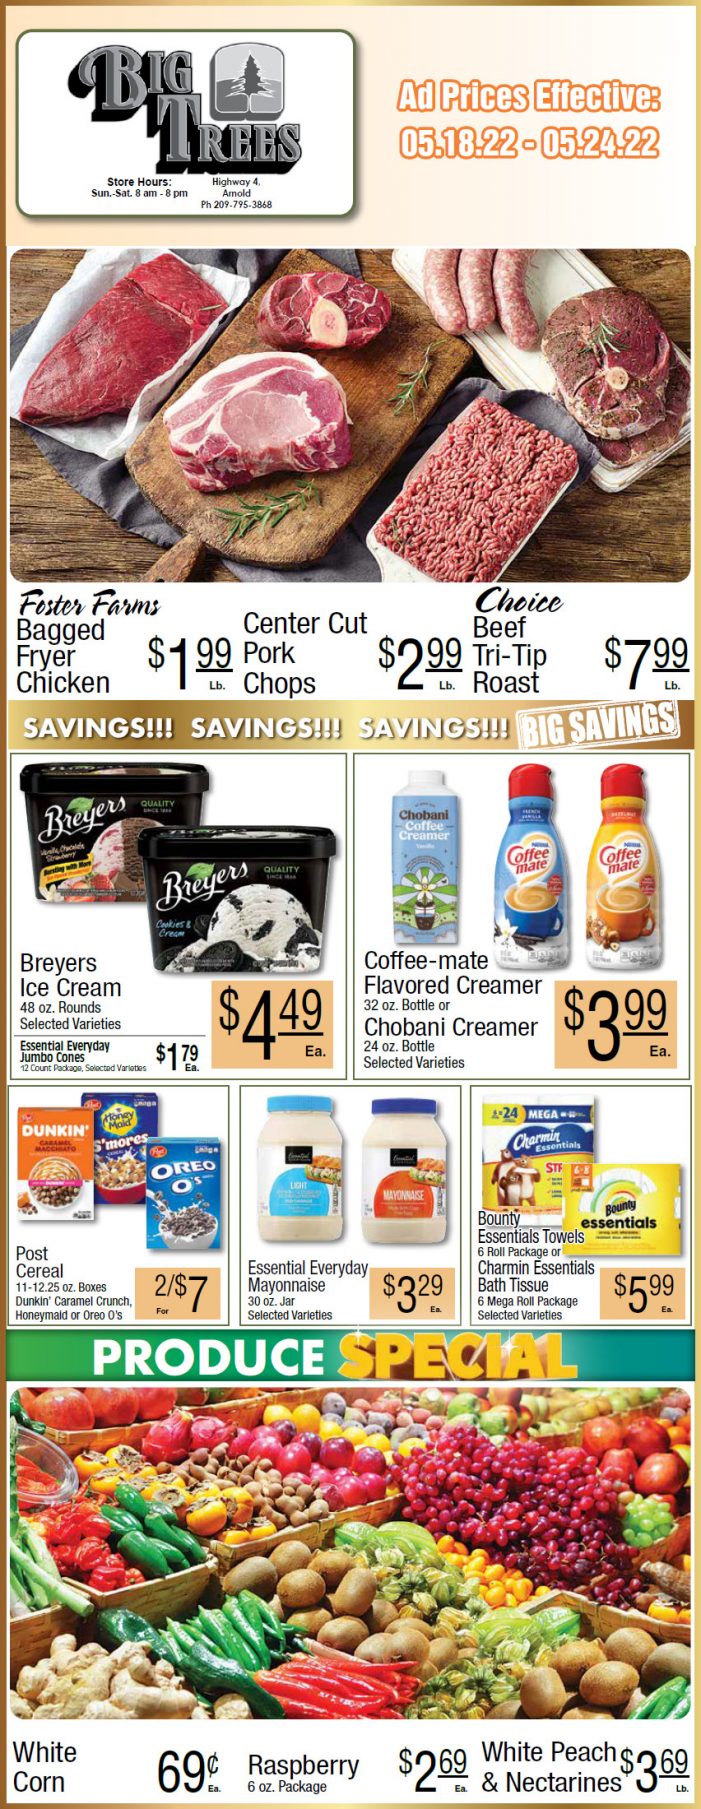 Big Trees Market Weekly Ad & Grocery Specials May 18th Through May 24th! Shop Local & Save!